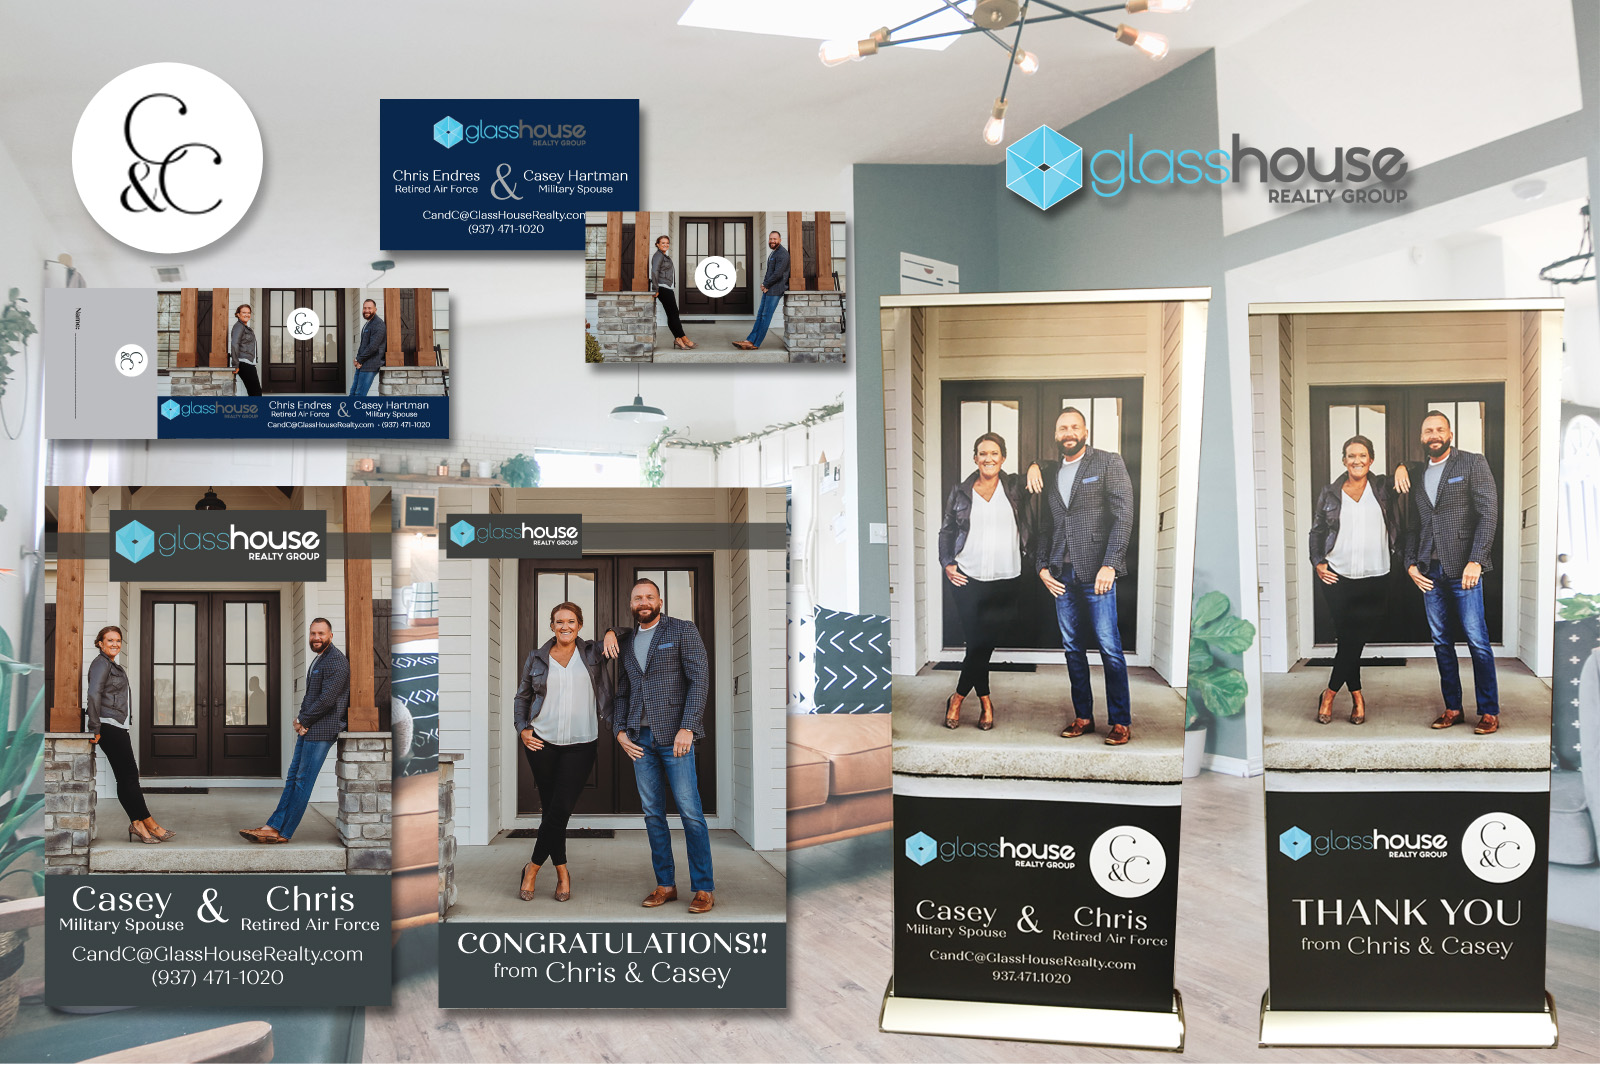 Chris & Casey of glasshouse Realty Group